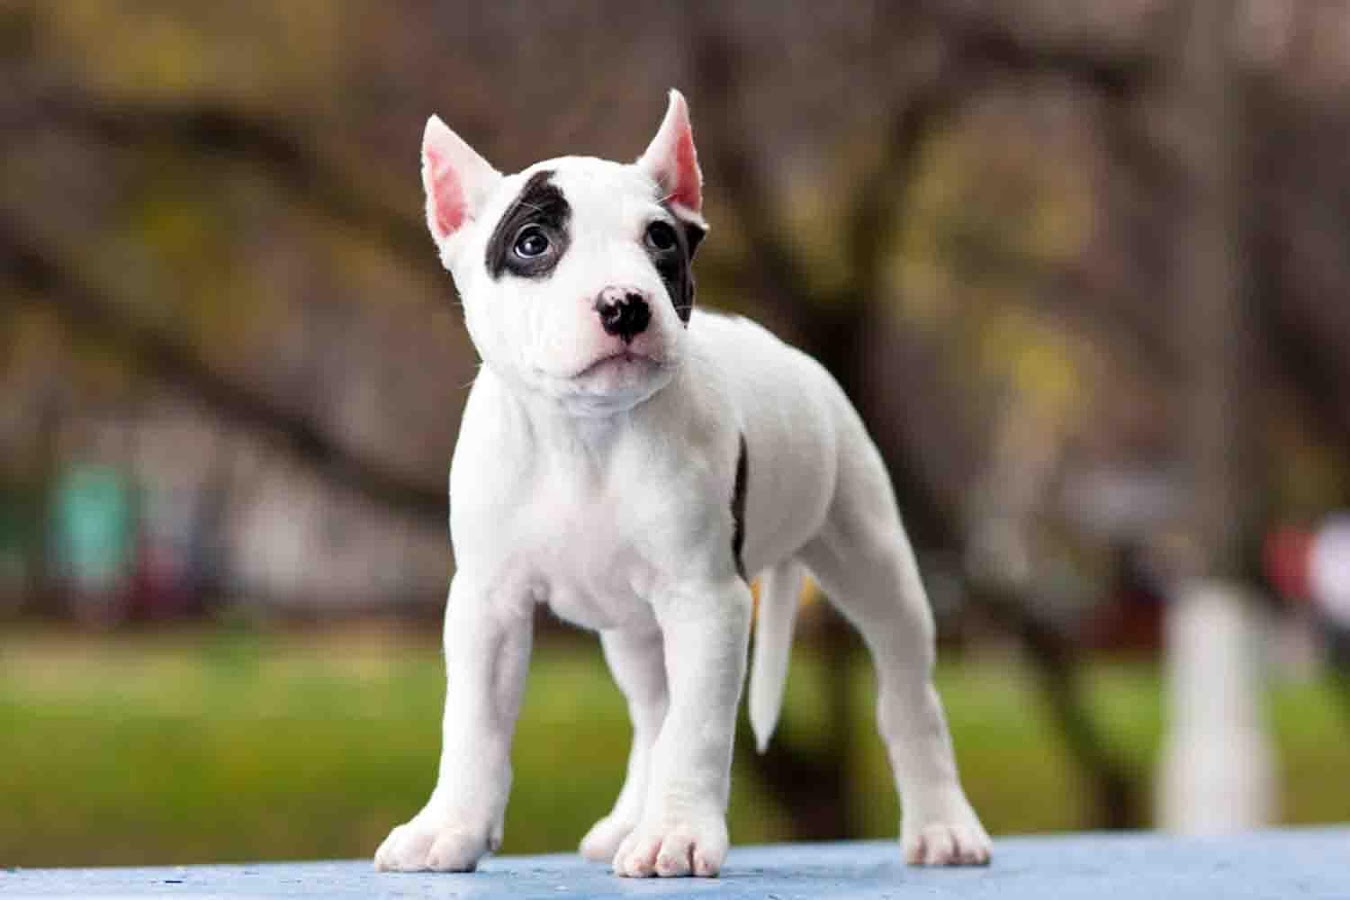 Puppy Pitbull Wallpaper - Android Apps on Google Play